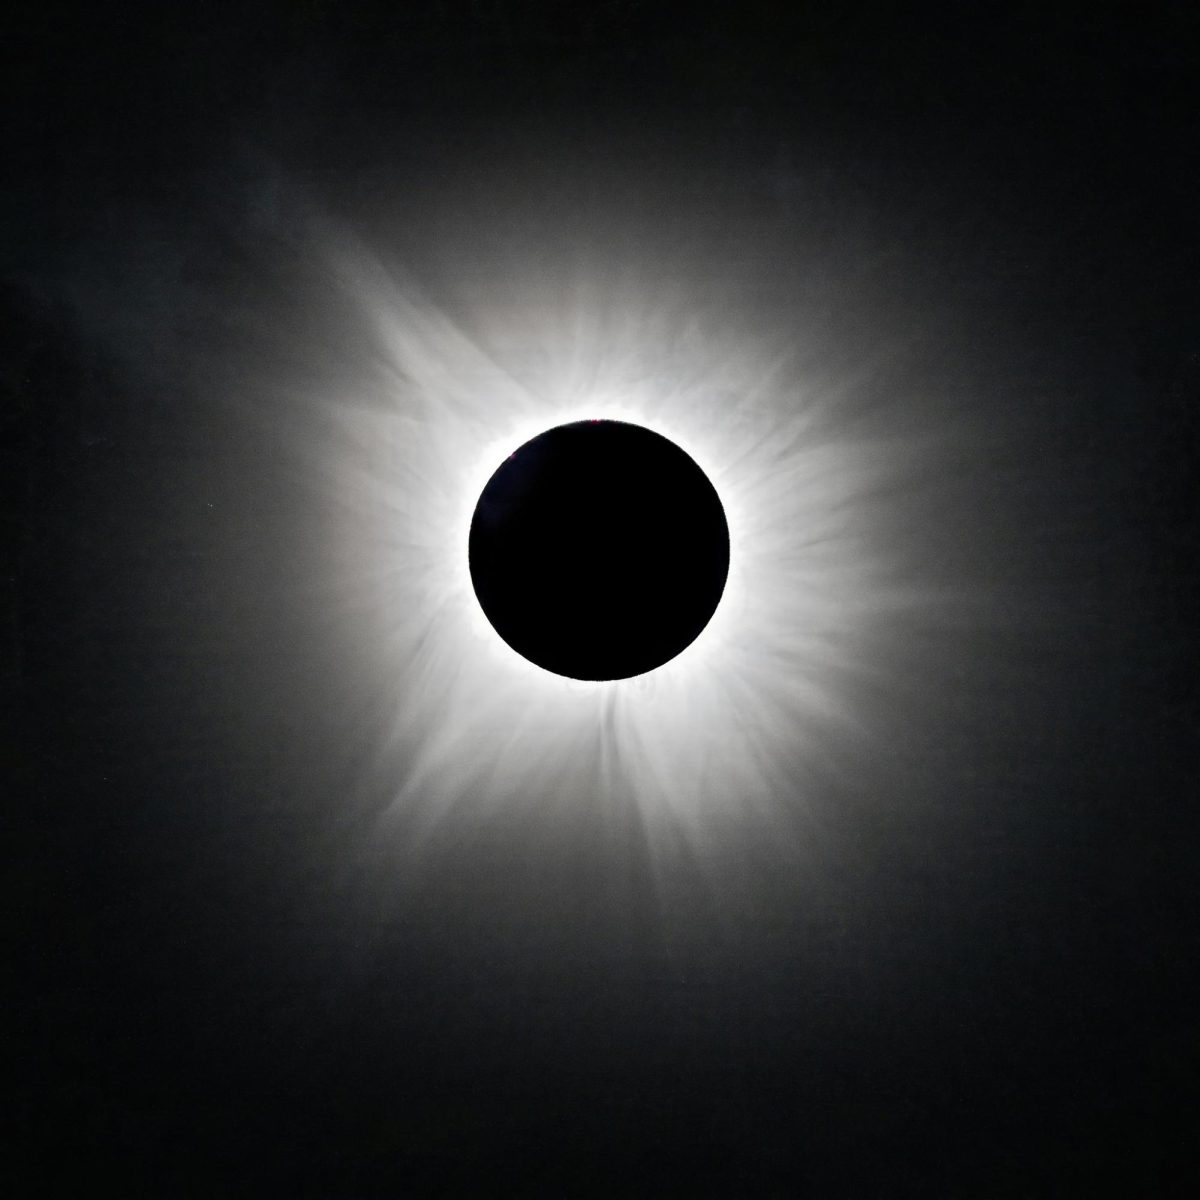 A composite photo must be used to capture the full range of the suns corona.